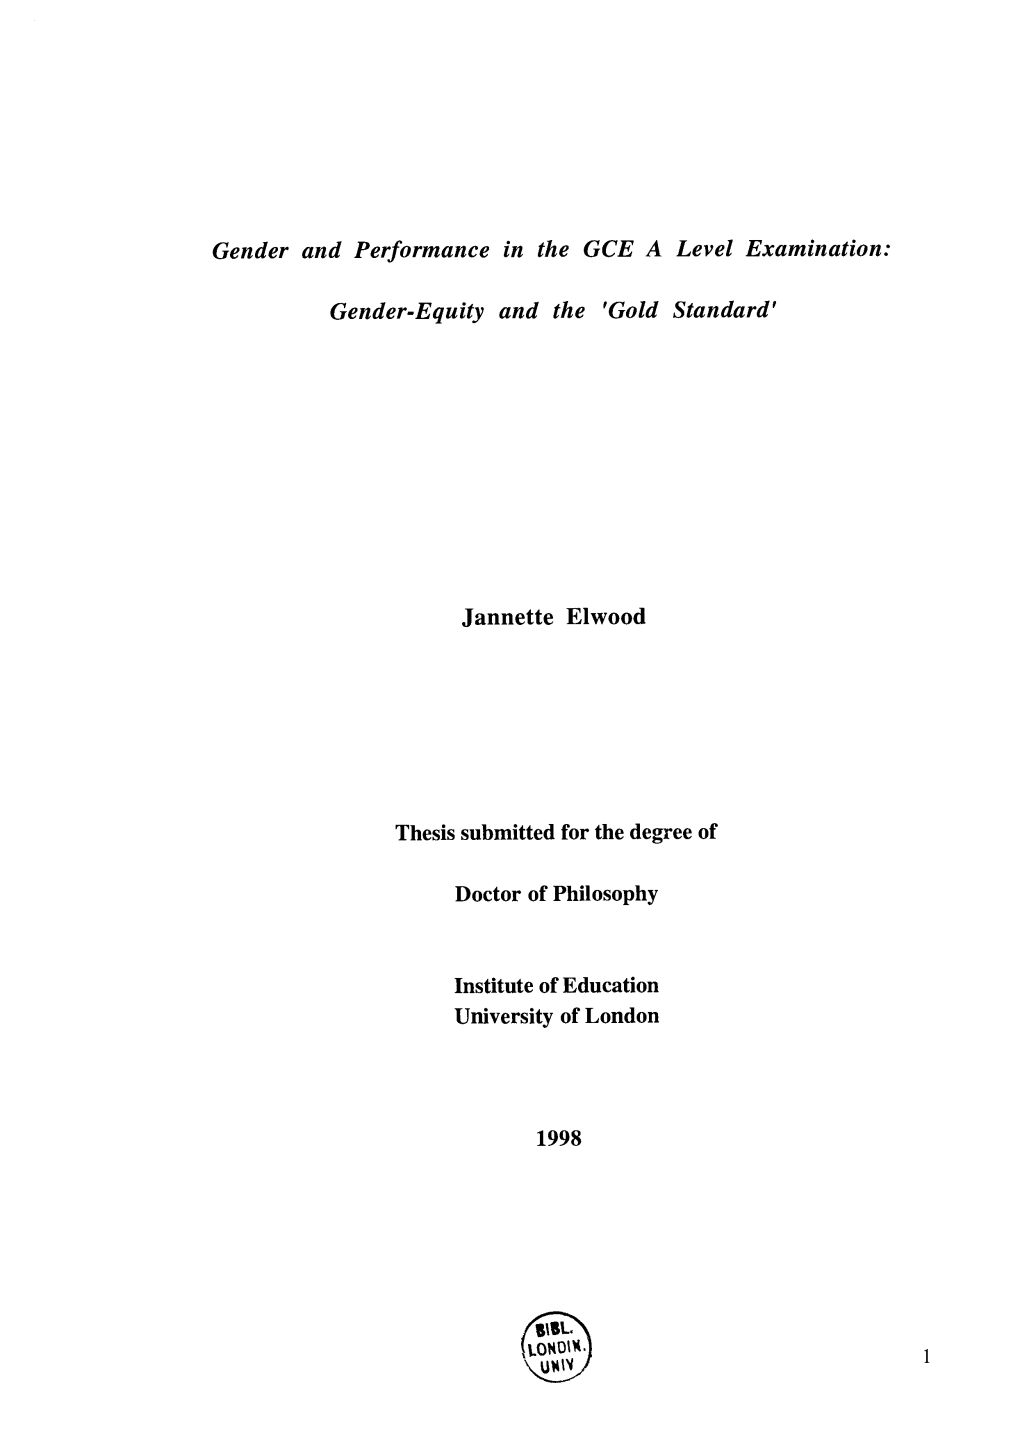 Gender and Performance in the GCE a Level Examination